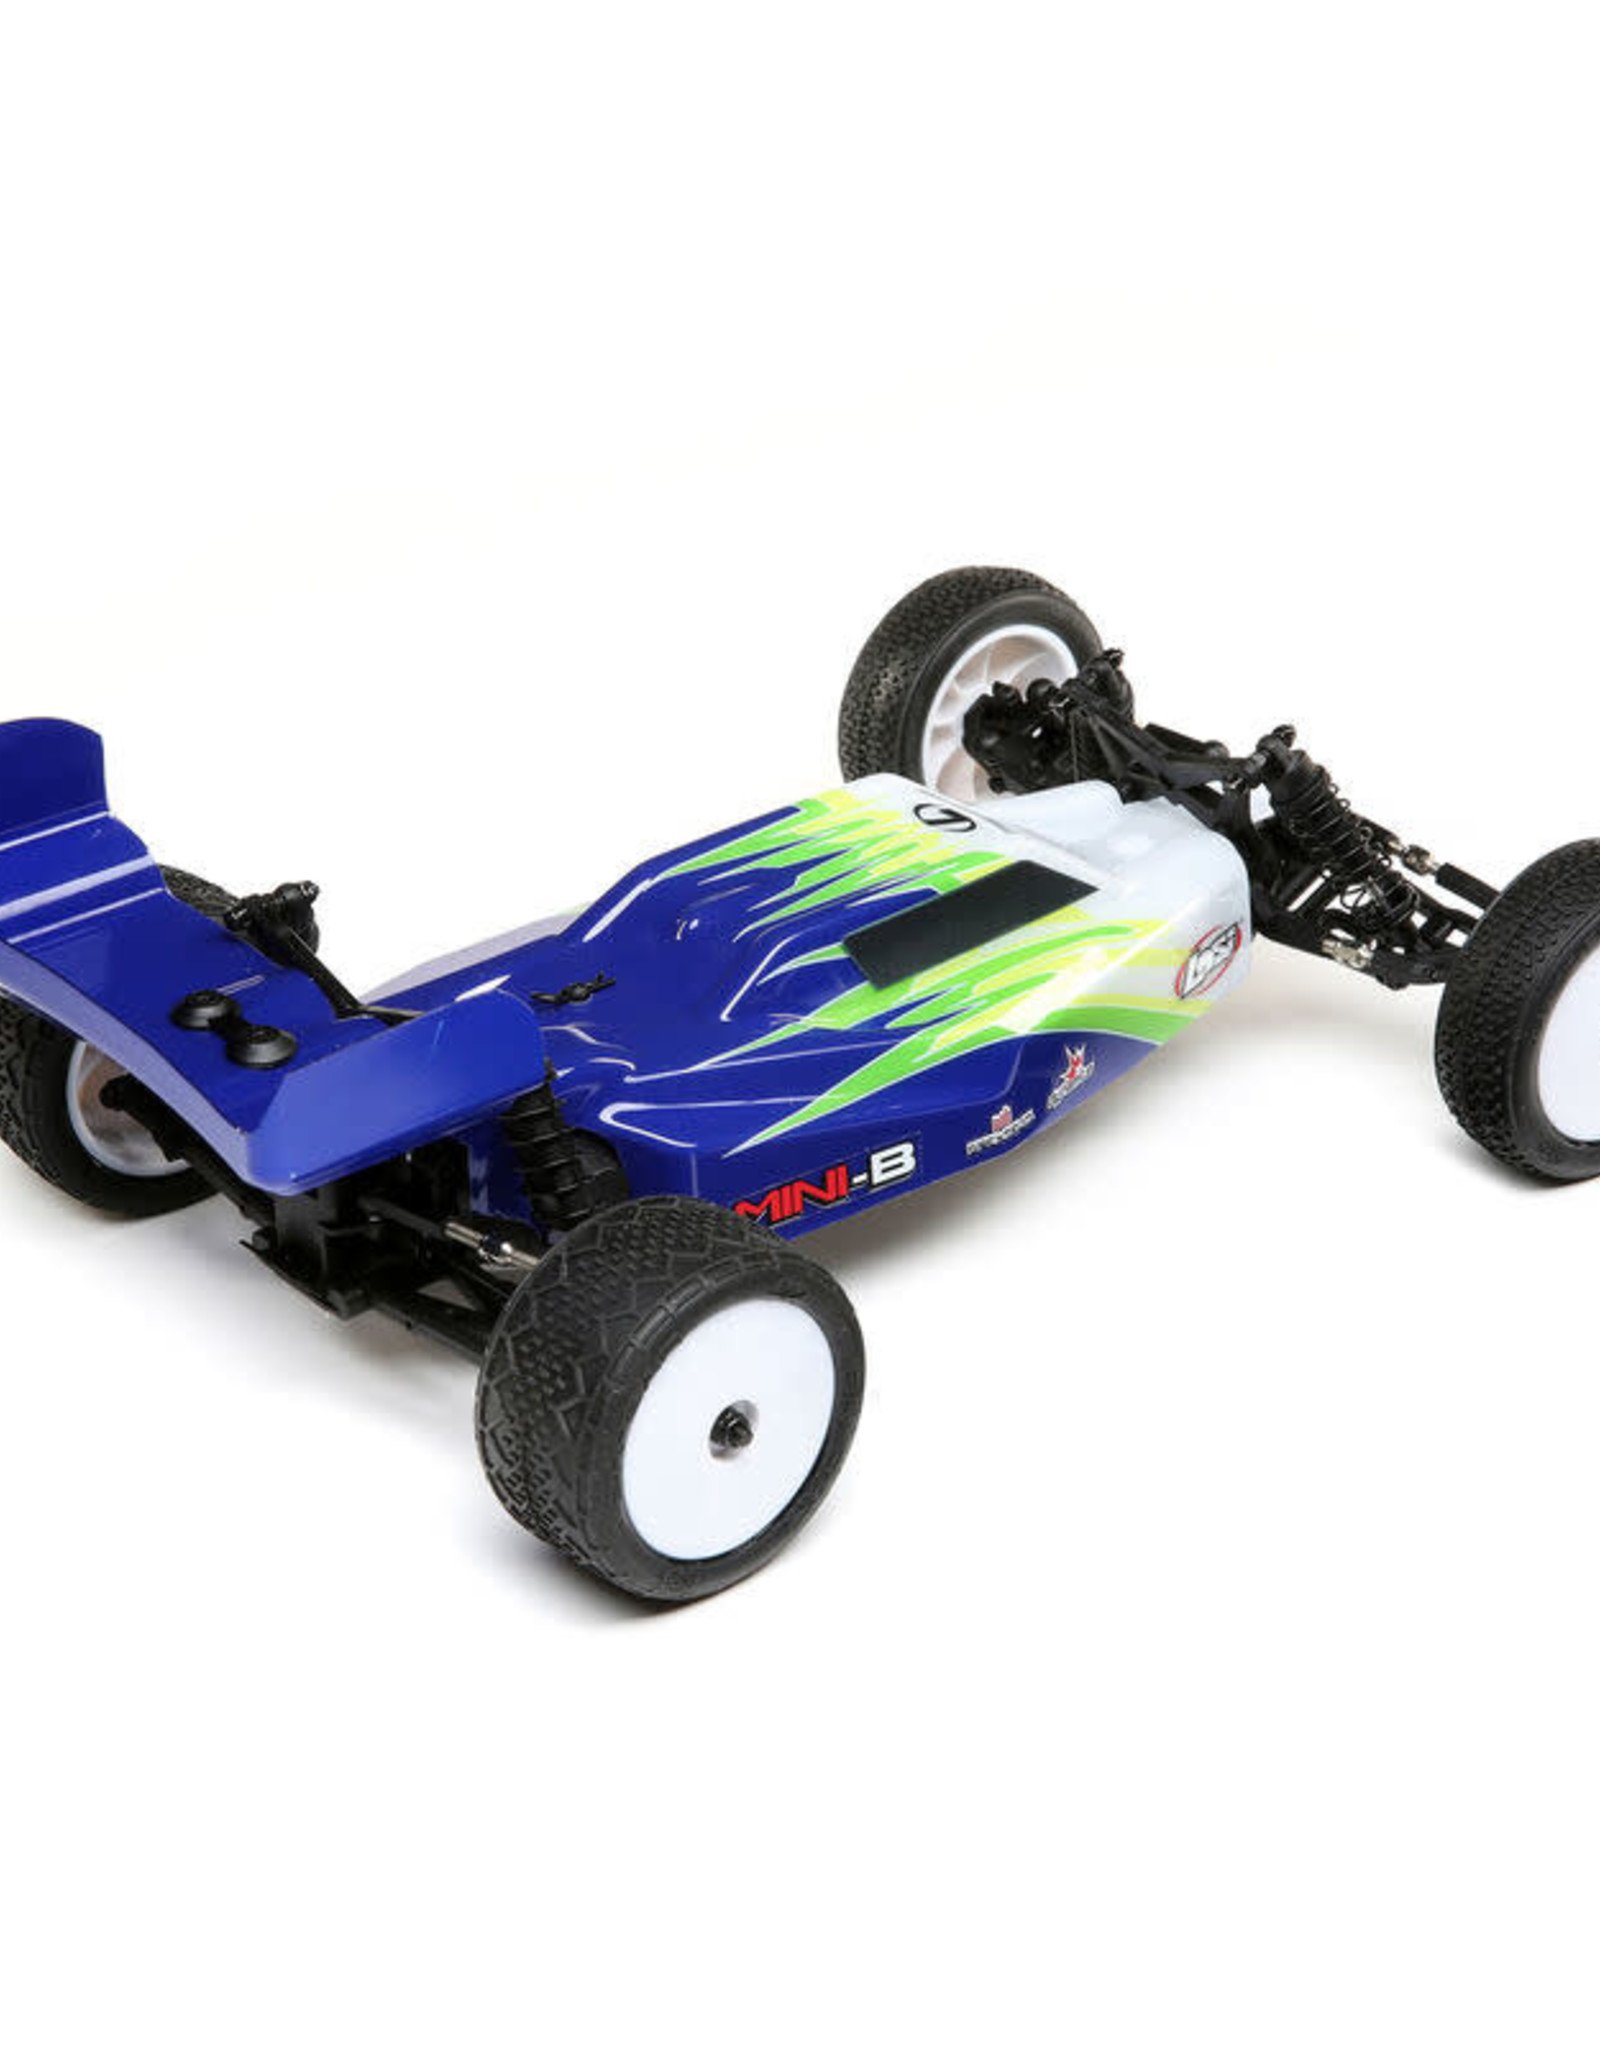 Losi LOS01016T1 1/16 Mini-B Brushed RTR 2WD Buggy, Blue/White